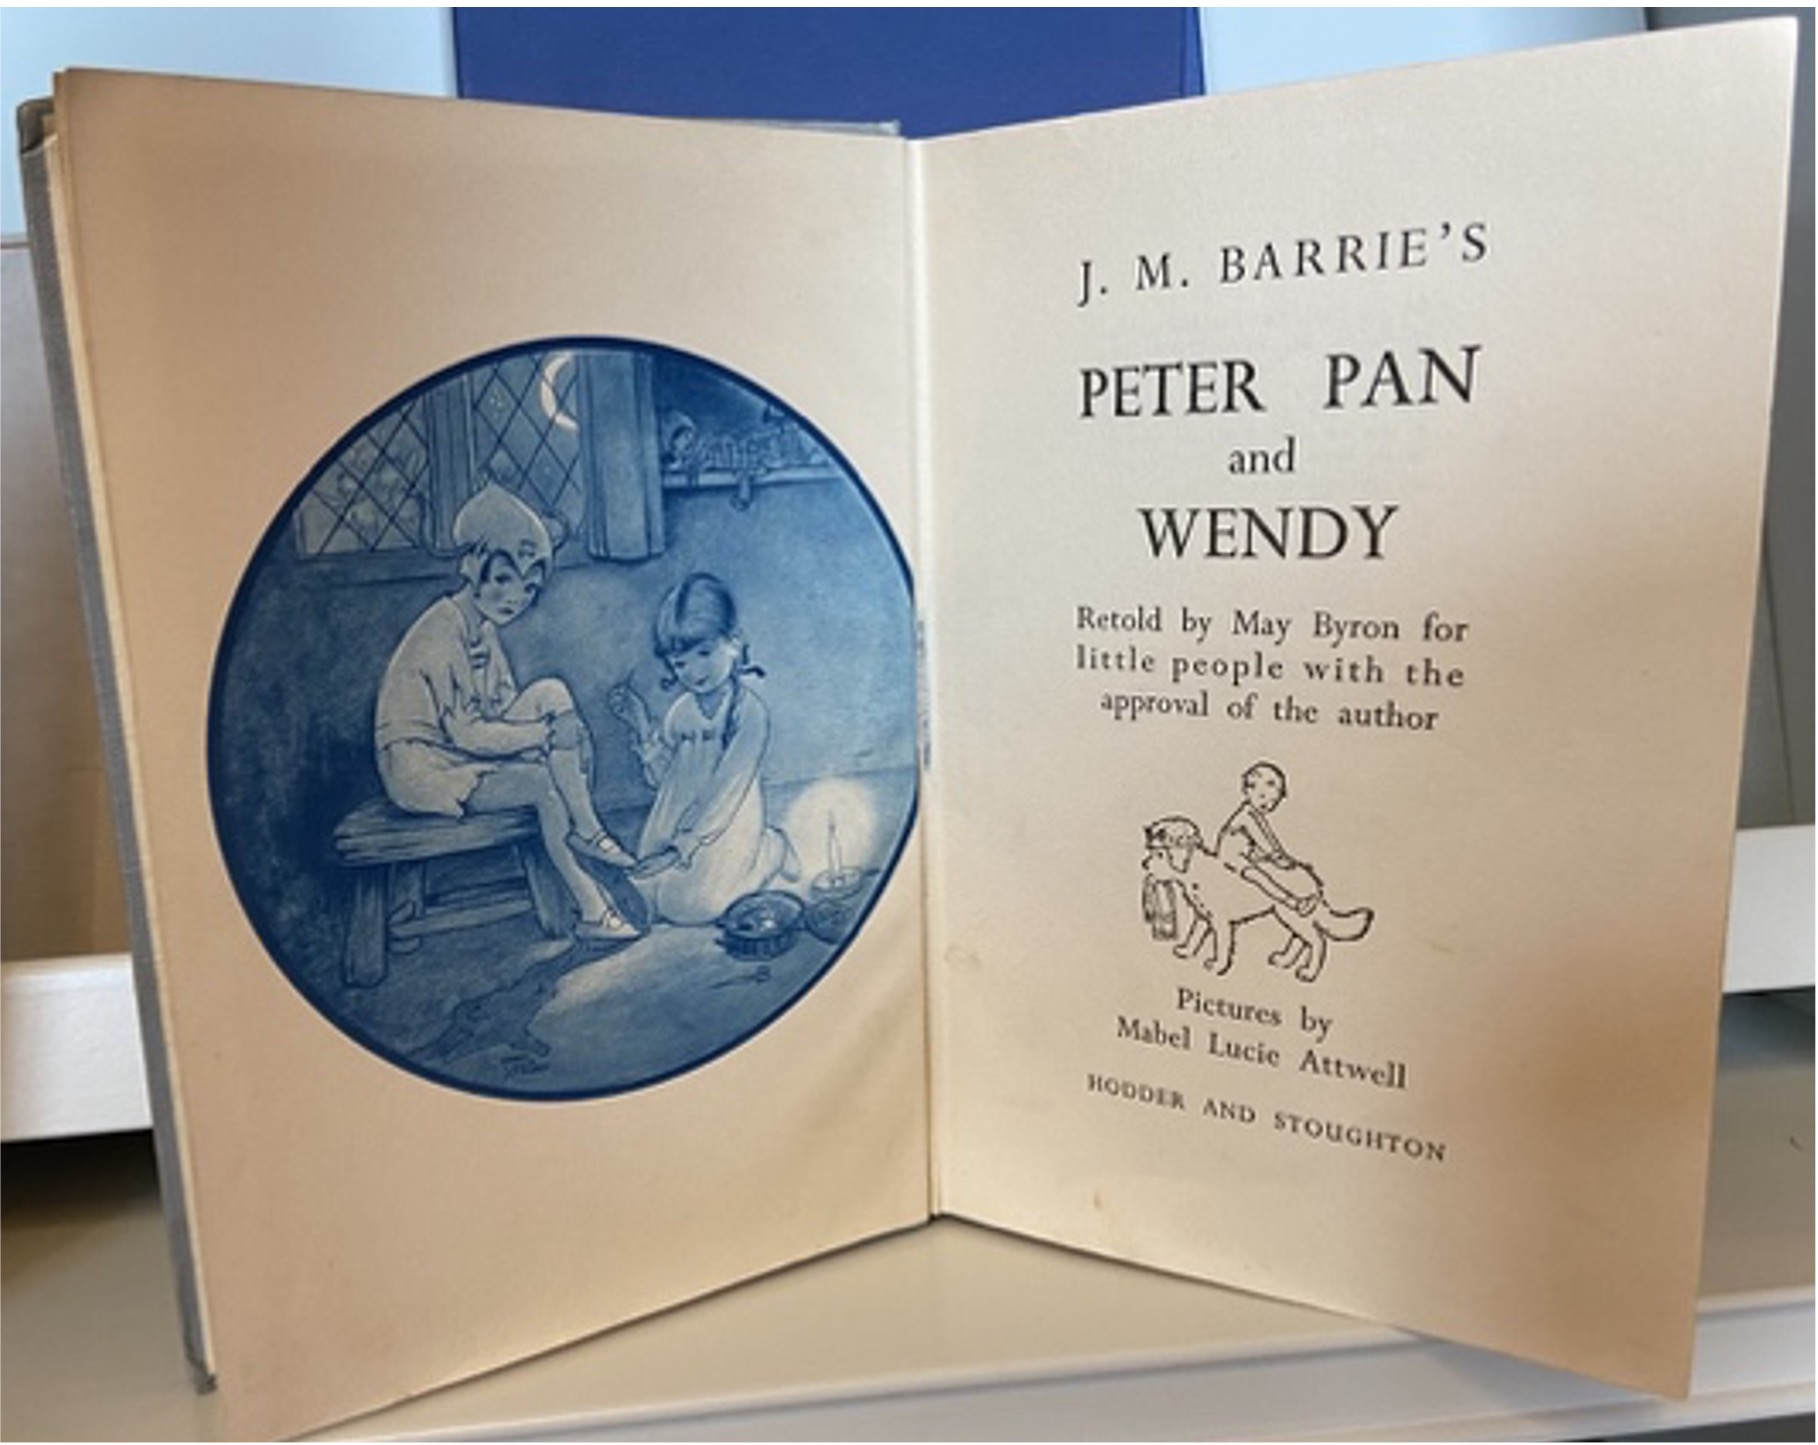 J. M. Barrie's Peter Pan and Wendy open book